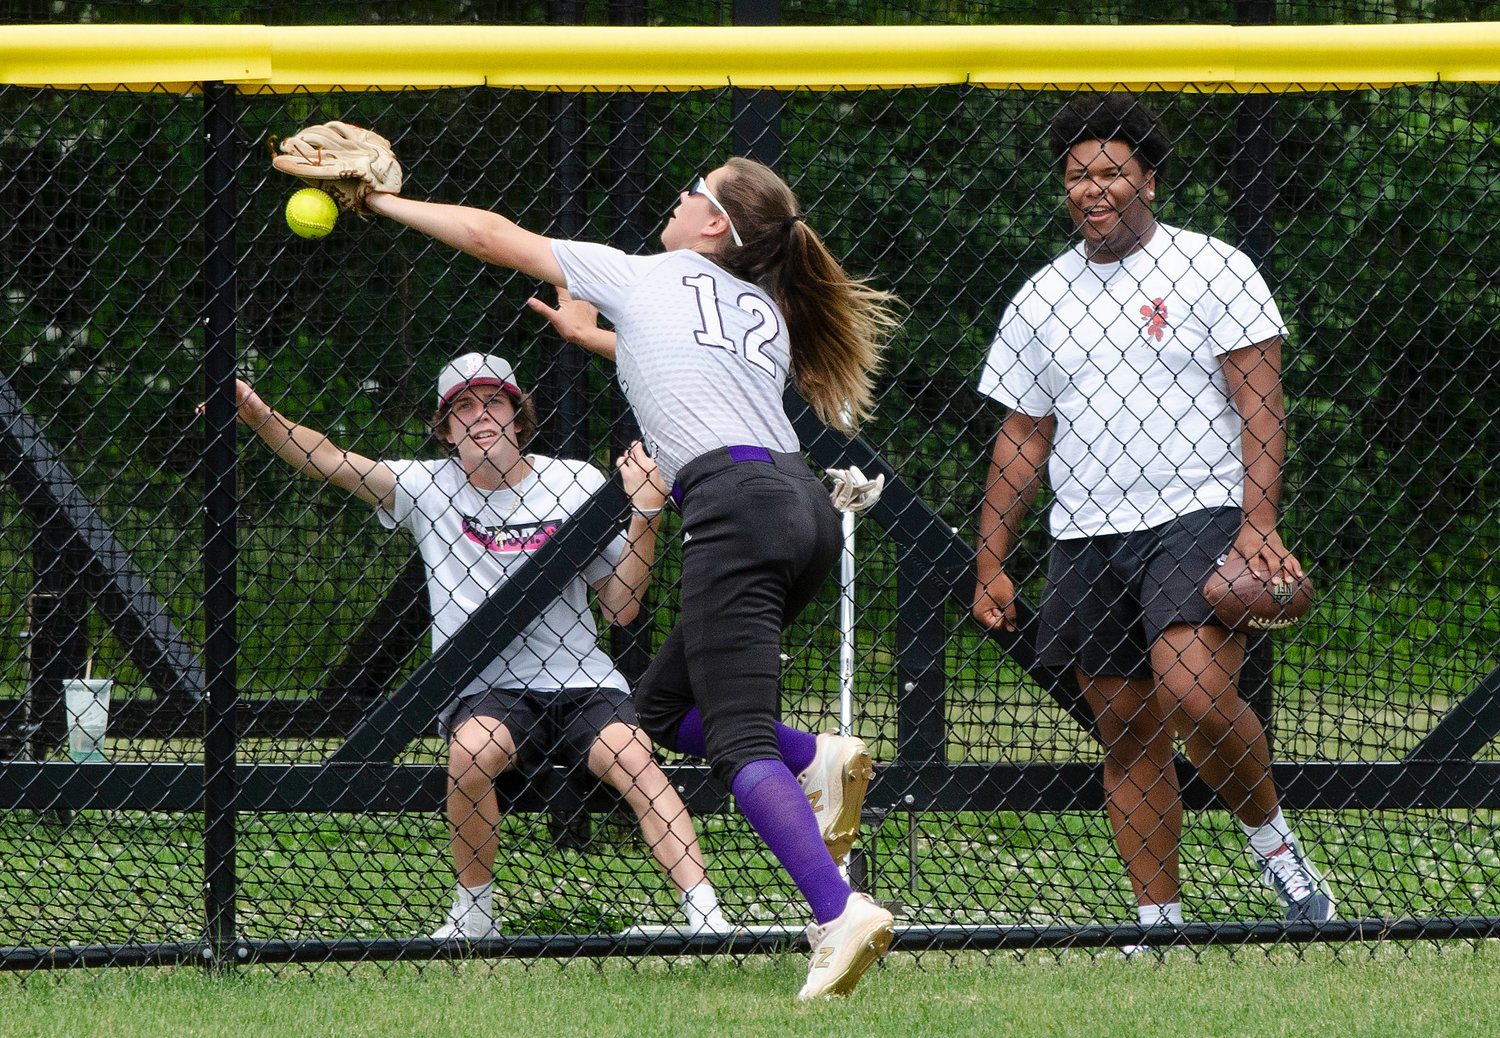 Centerfielder Jayda Sylvia attempts to make a catch of a fly ball hit to the gap in the fifth inning. She slammed into the fence and teammate Elsa White collected the ball and threw it in to prfevent further damage. Sylvia got up, brushed her self off and kept on playing.